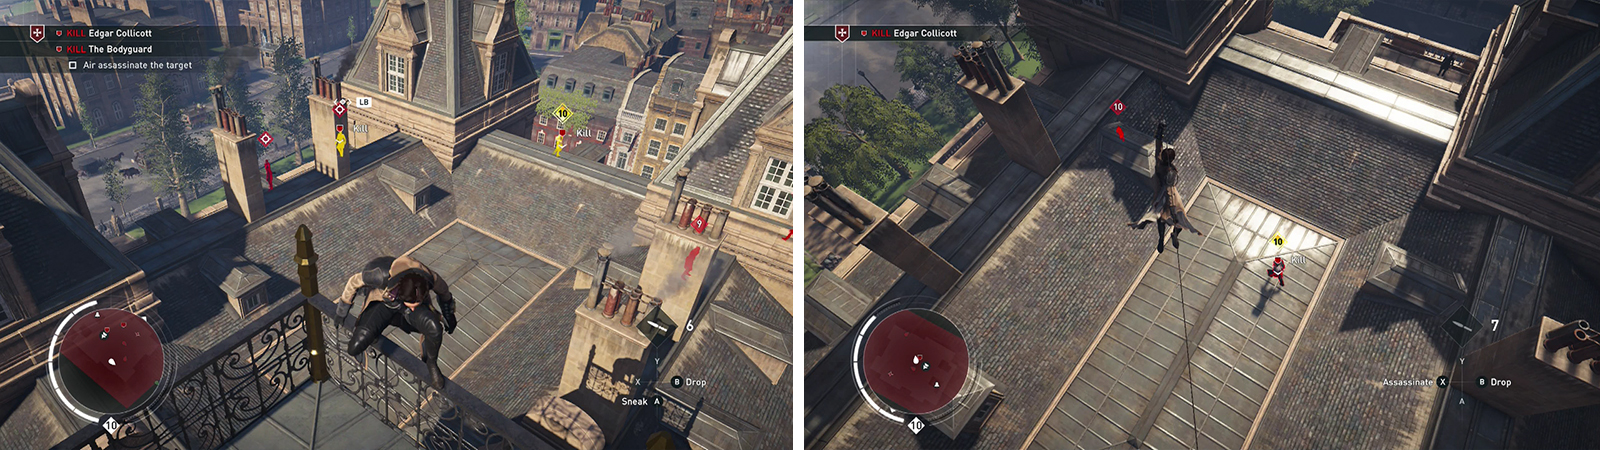 Both targets can be found on the roof (left). Use your Rope Launcher to air assassinate them via zip lines (right).